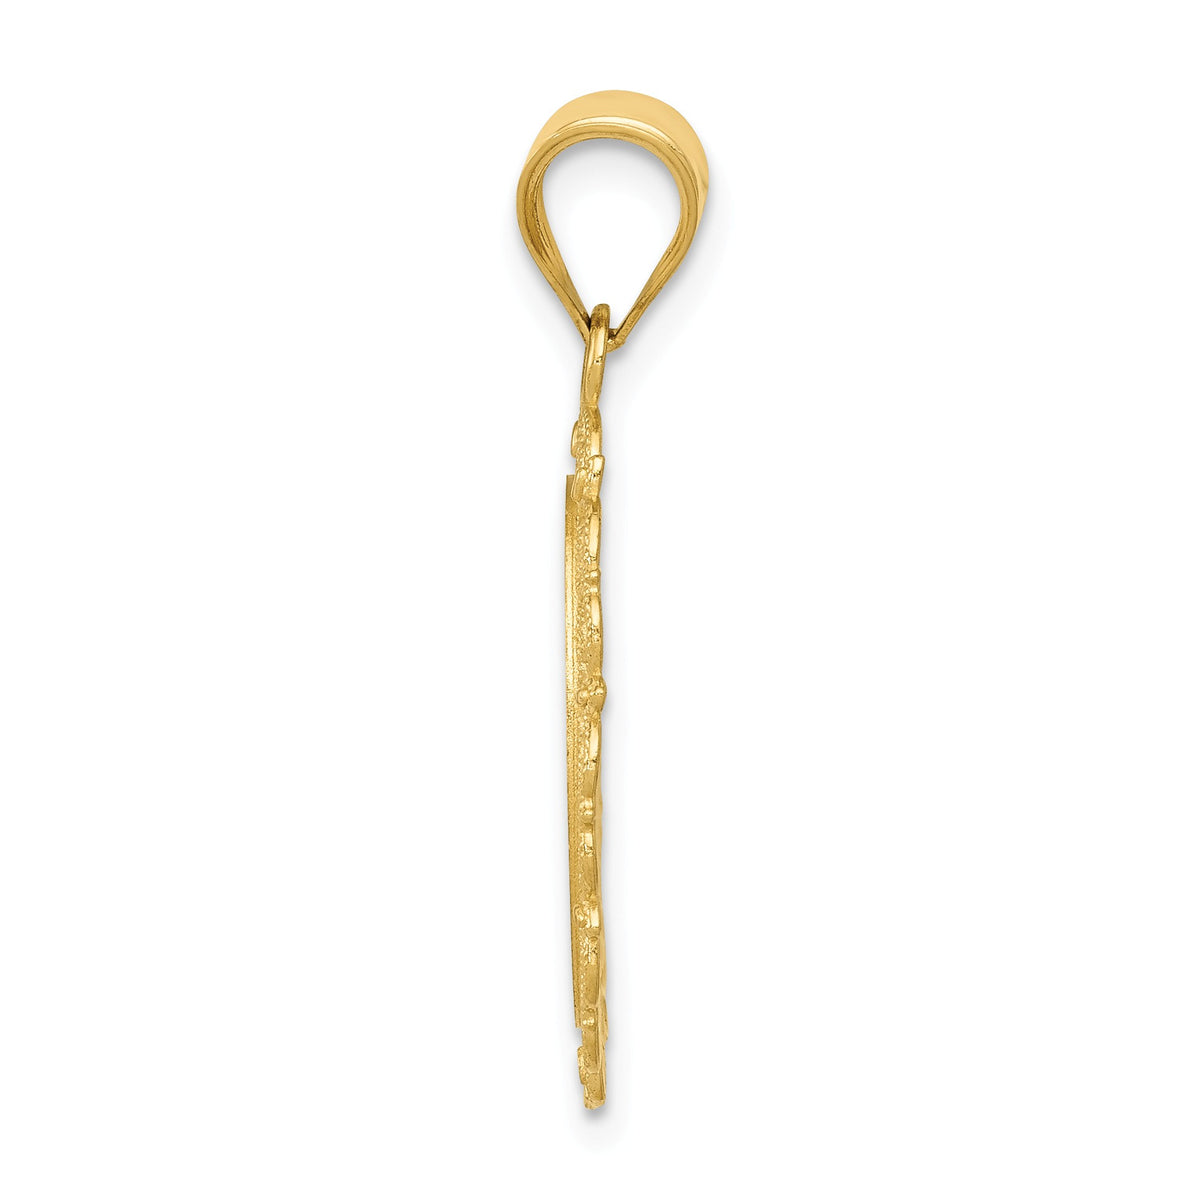 Alternate view of the 14k Yellow Gold Filigree Oval Virgo the Virgin Zodiac Pendant, 20mm by The Black Bow Jewelry Co.